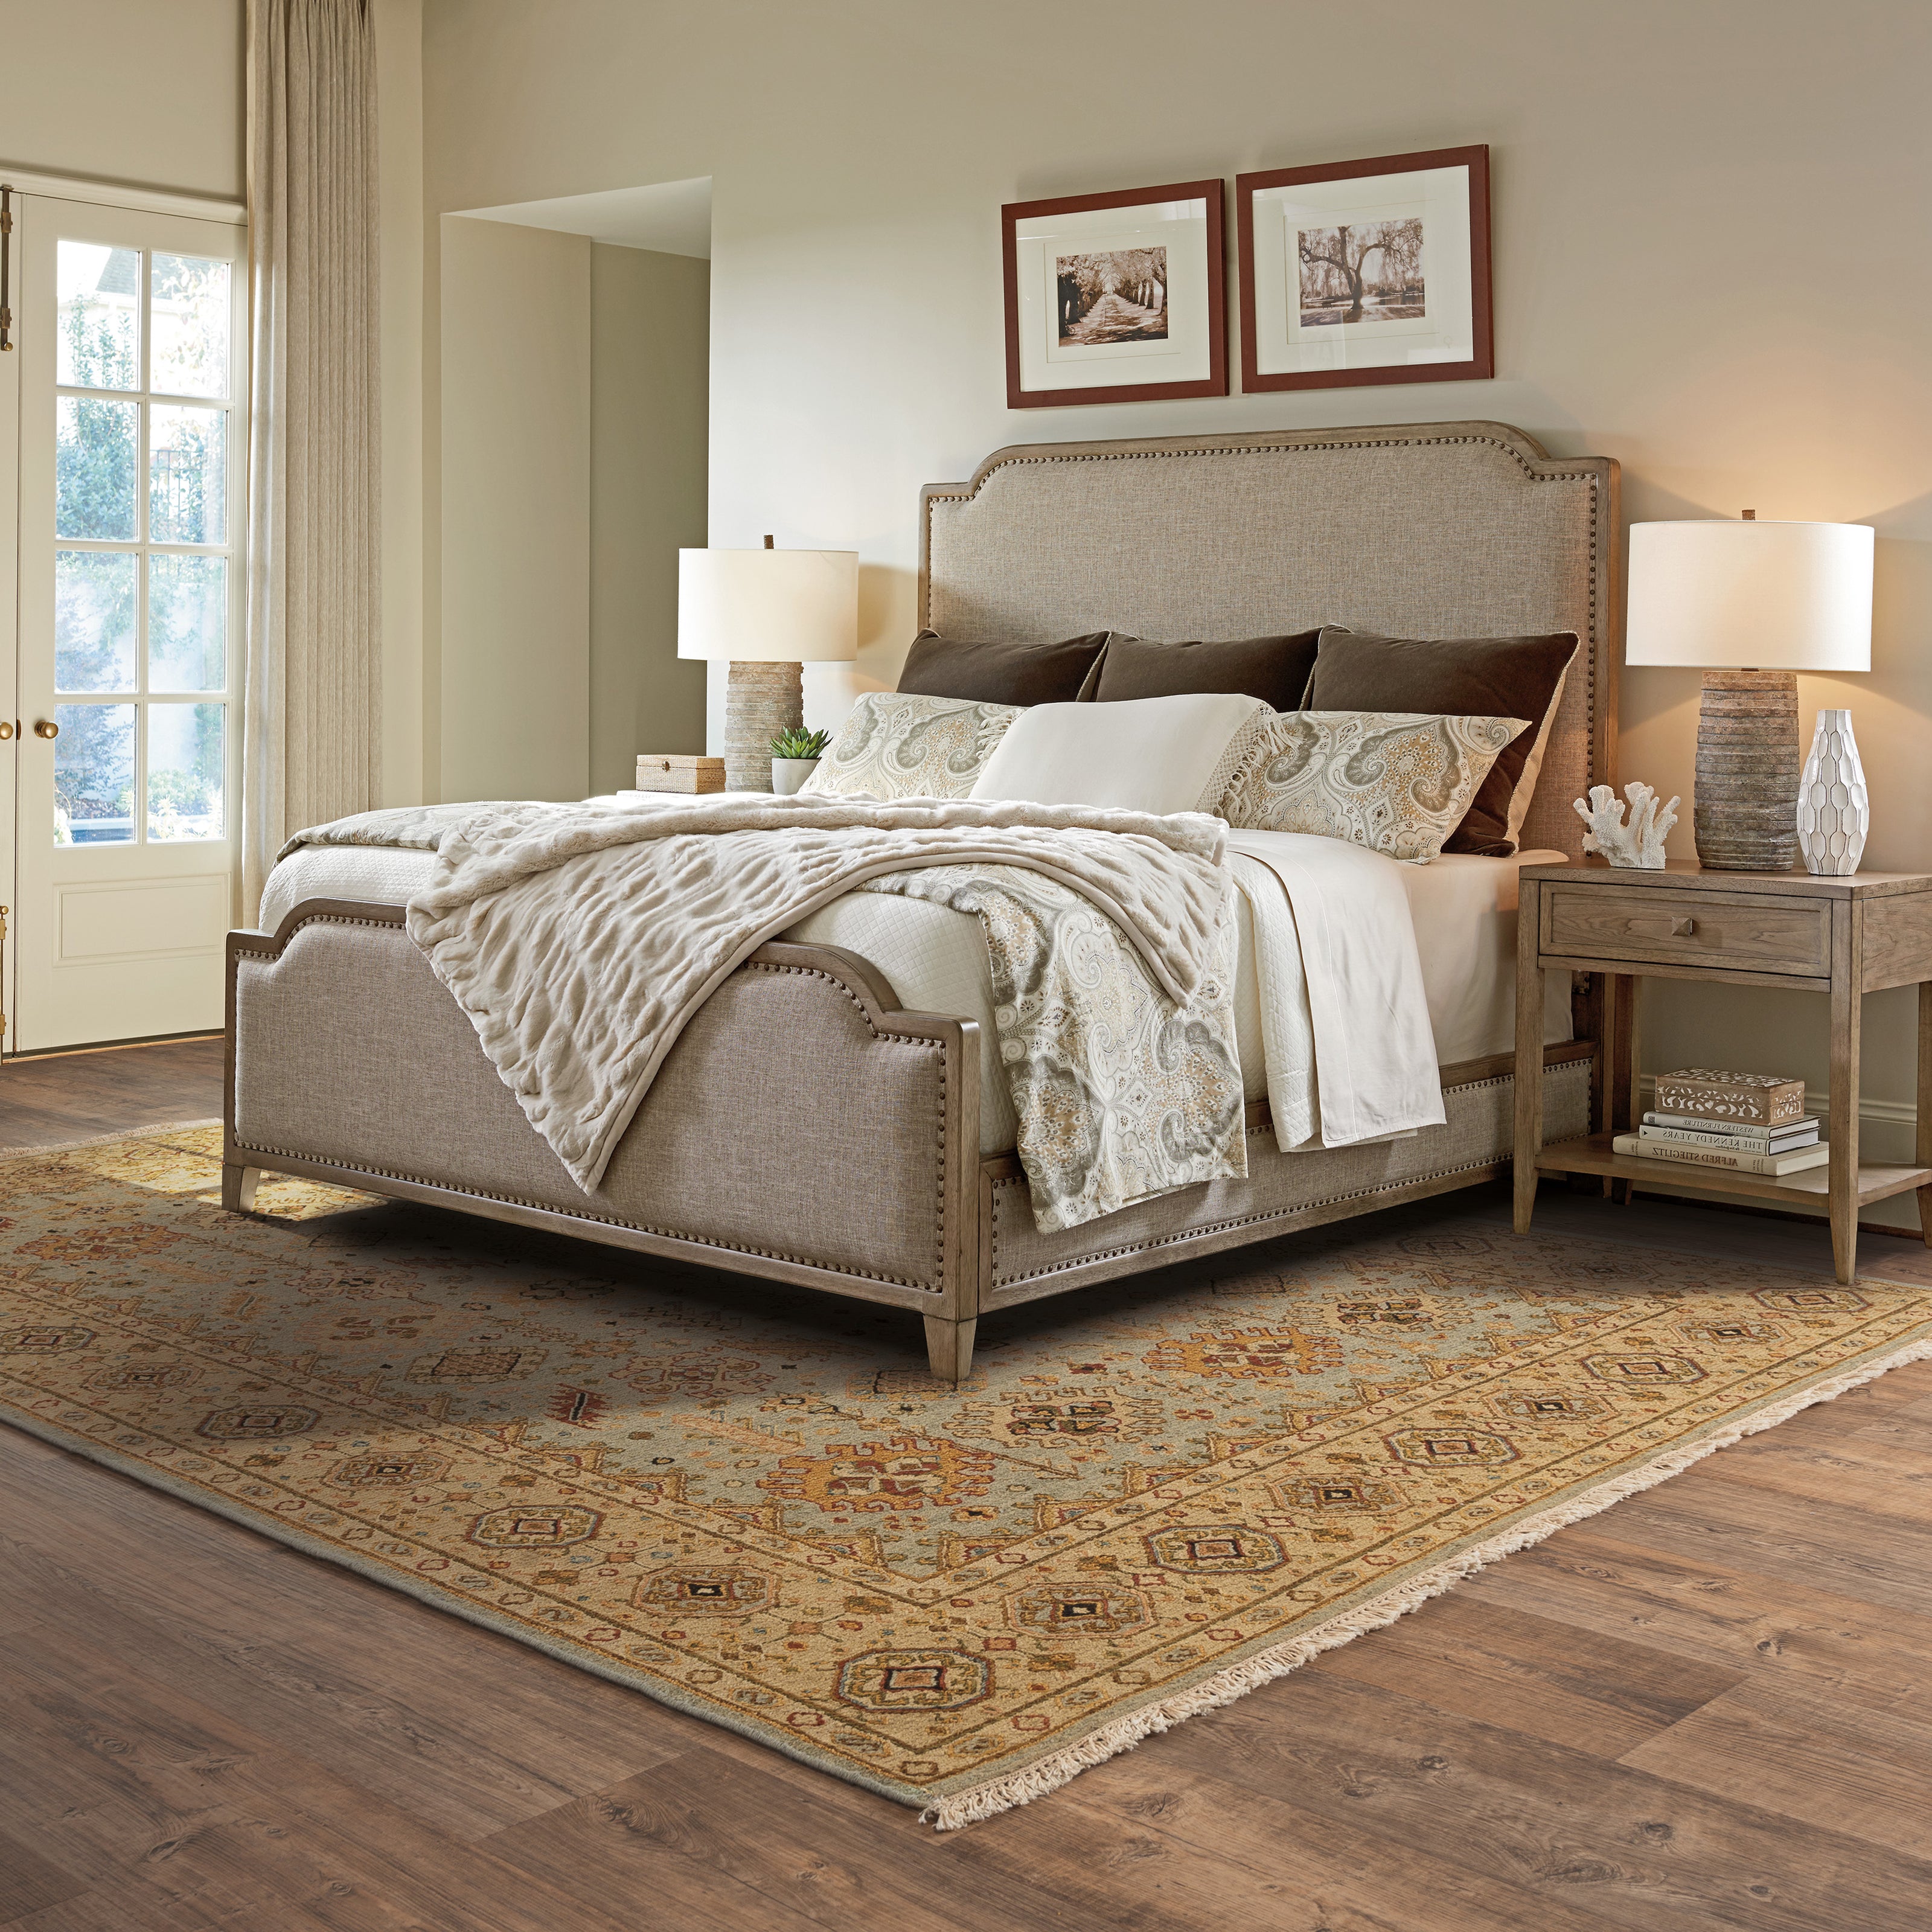 How to Choose the Best Bedroom Rug Placement